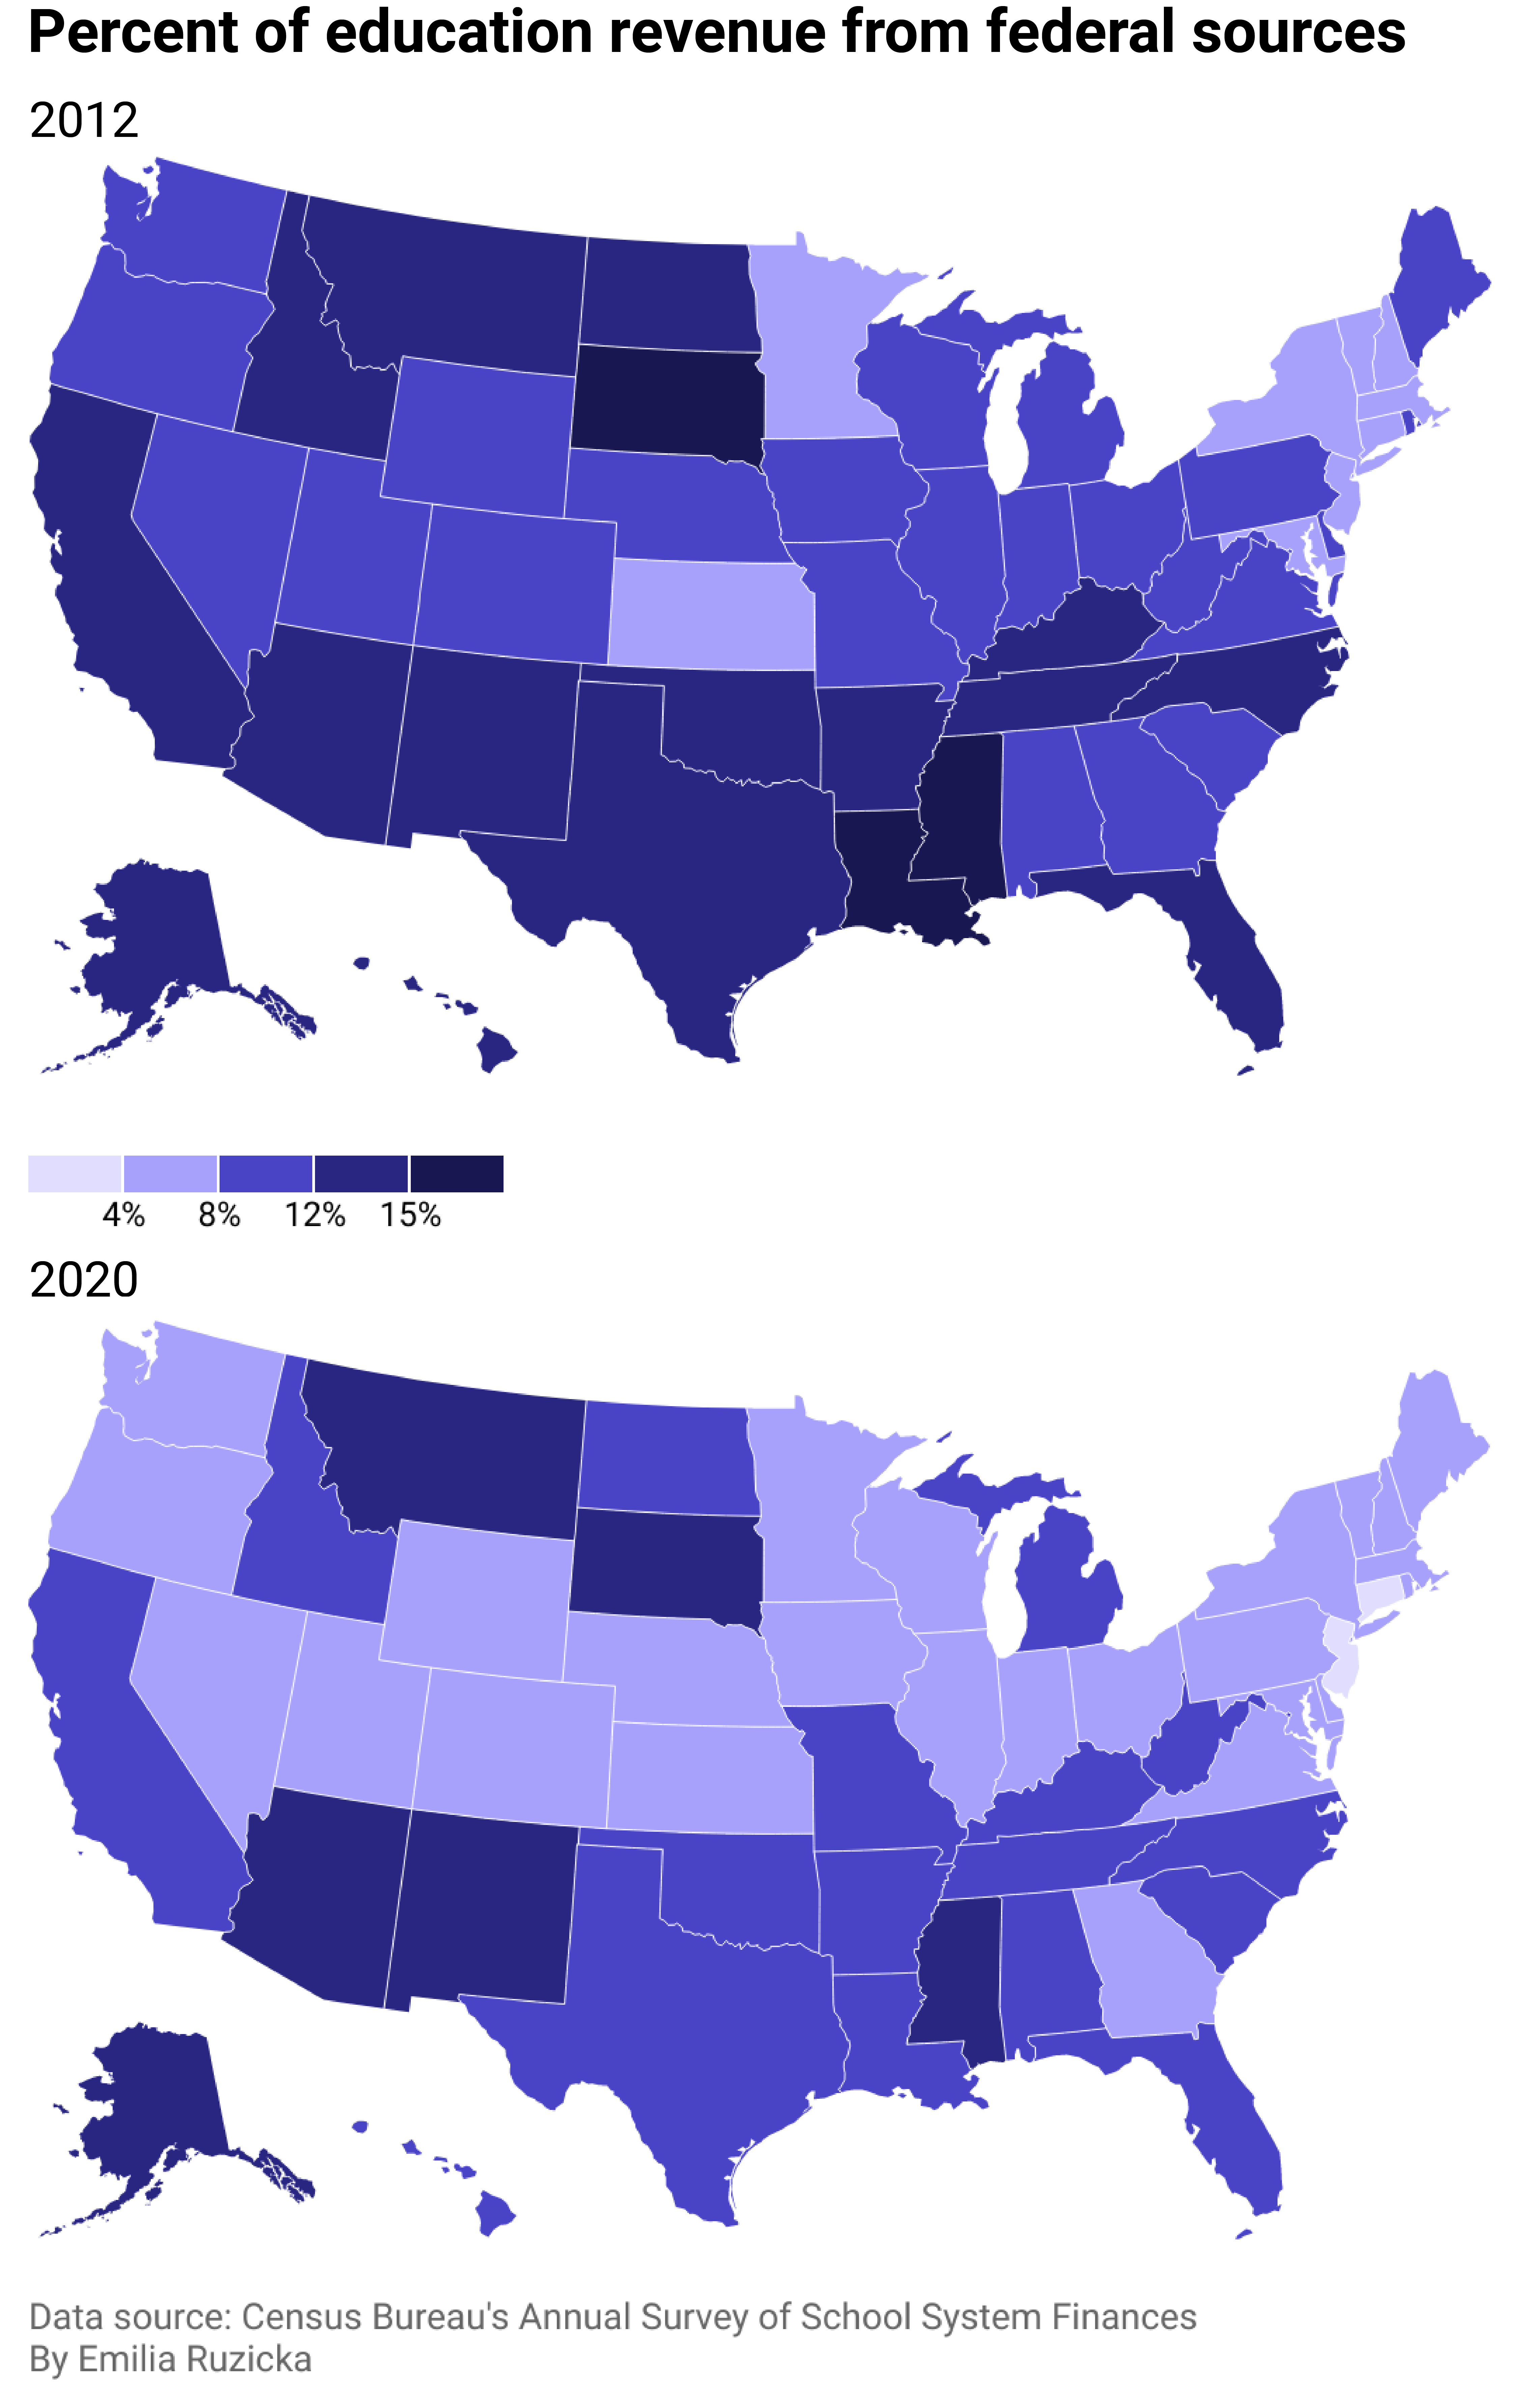 Two state-level choropleth maps of the U.S. showing how the percentage of education revenue coming from federal sources has decreased in most states.